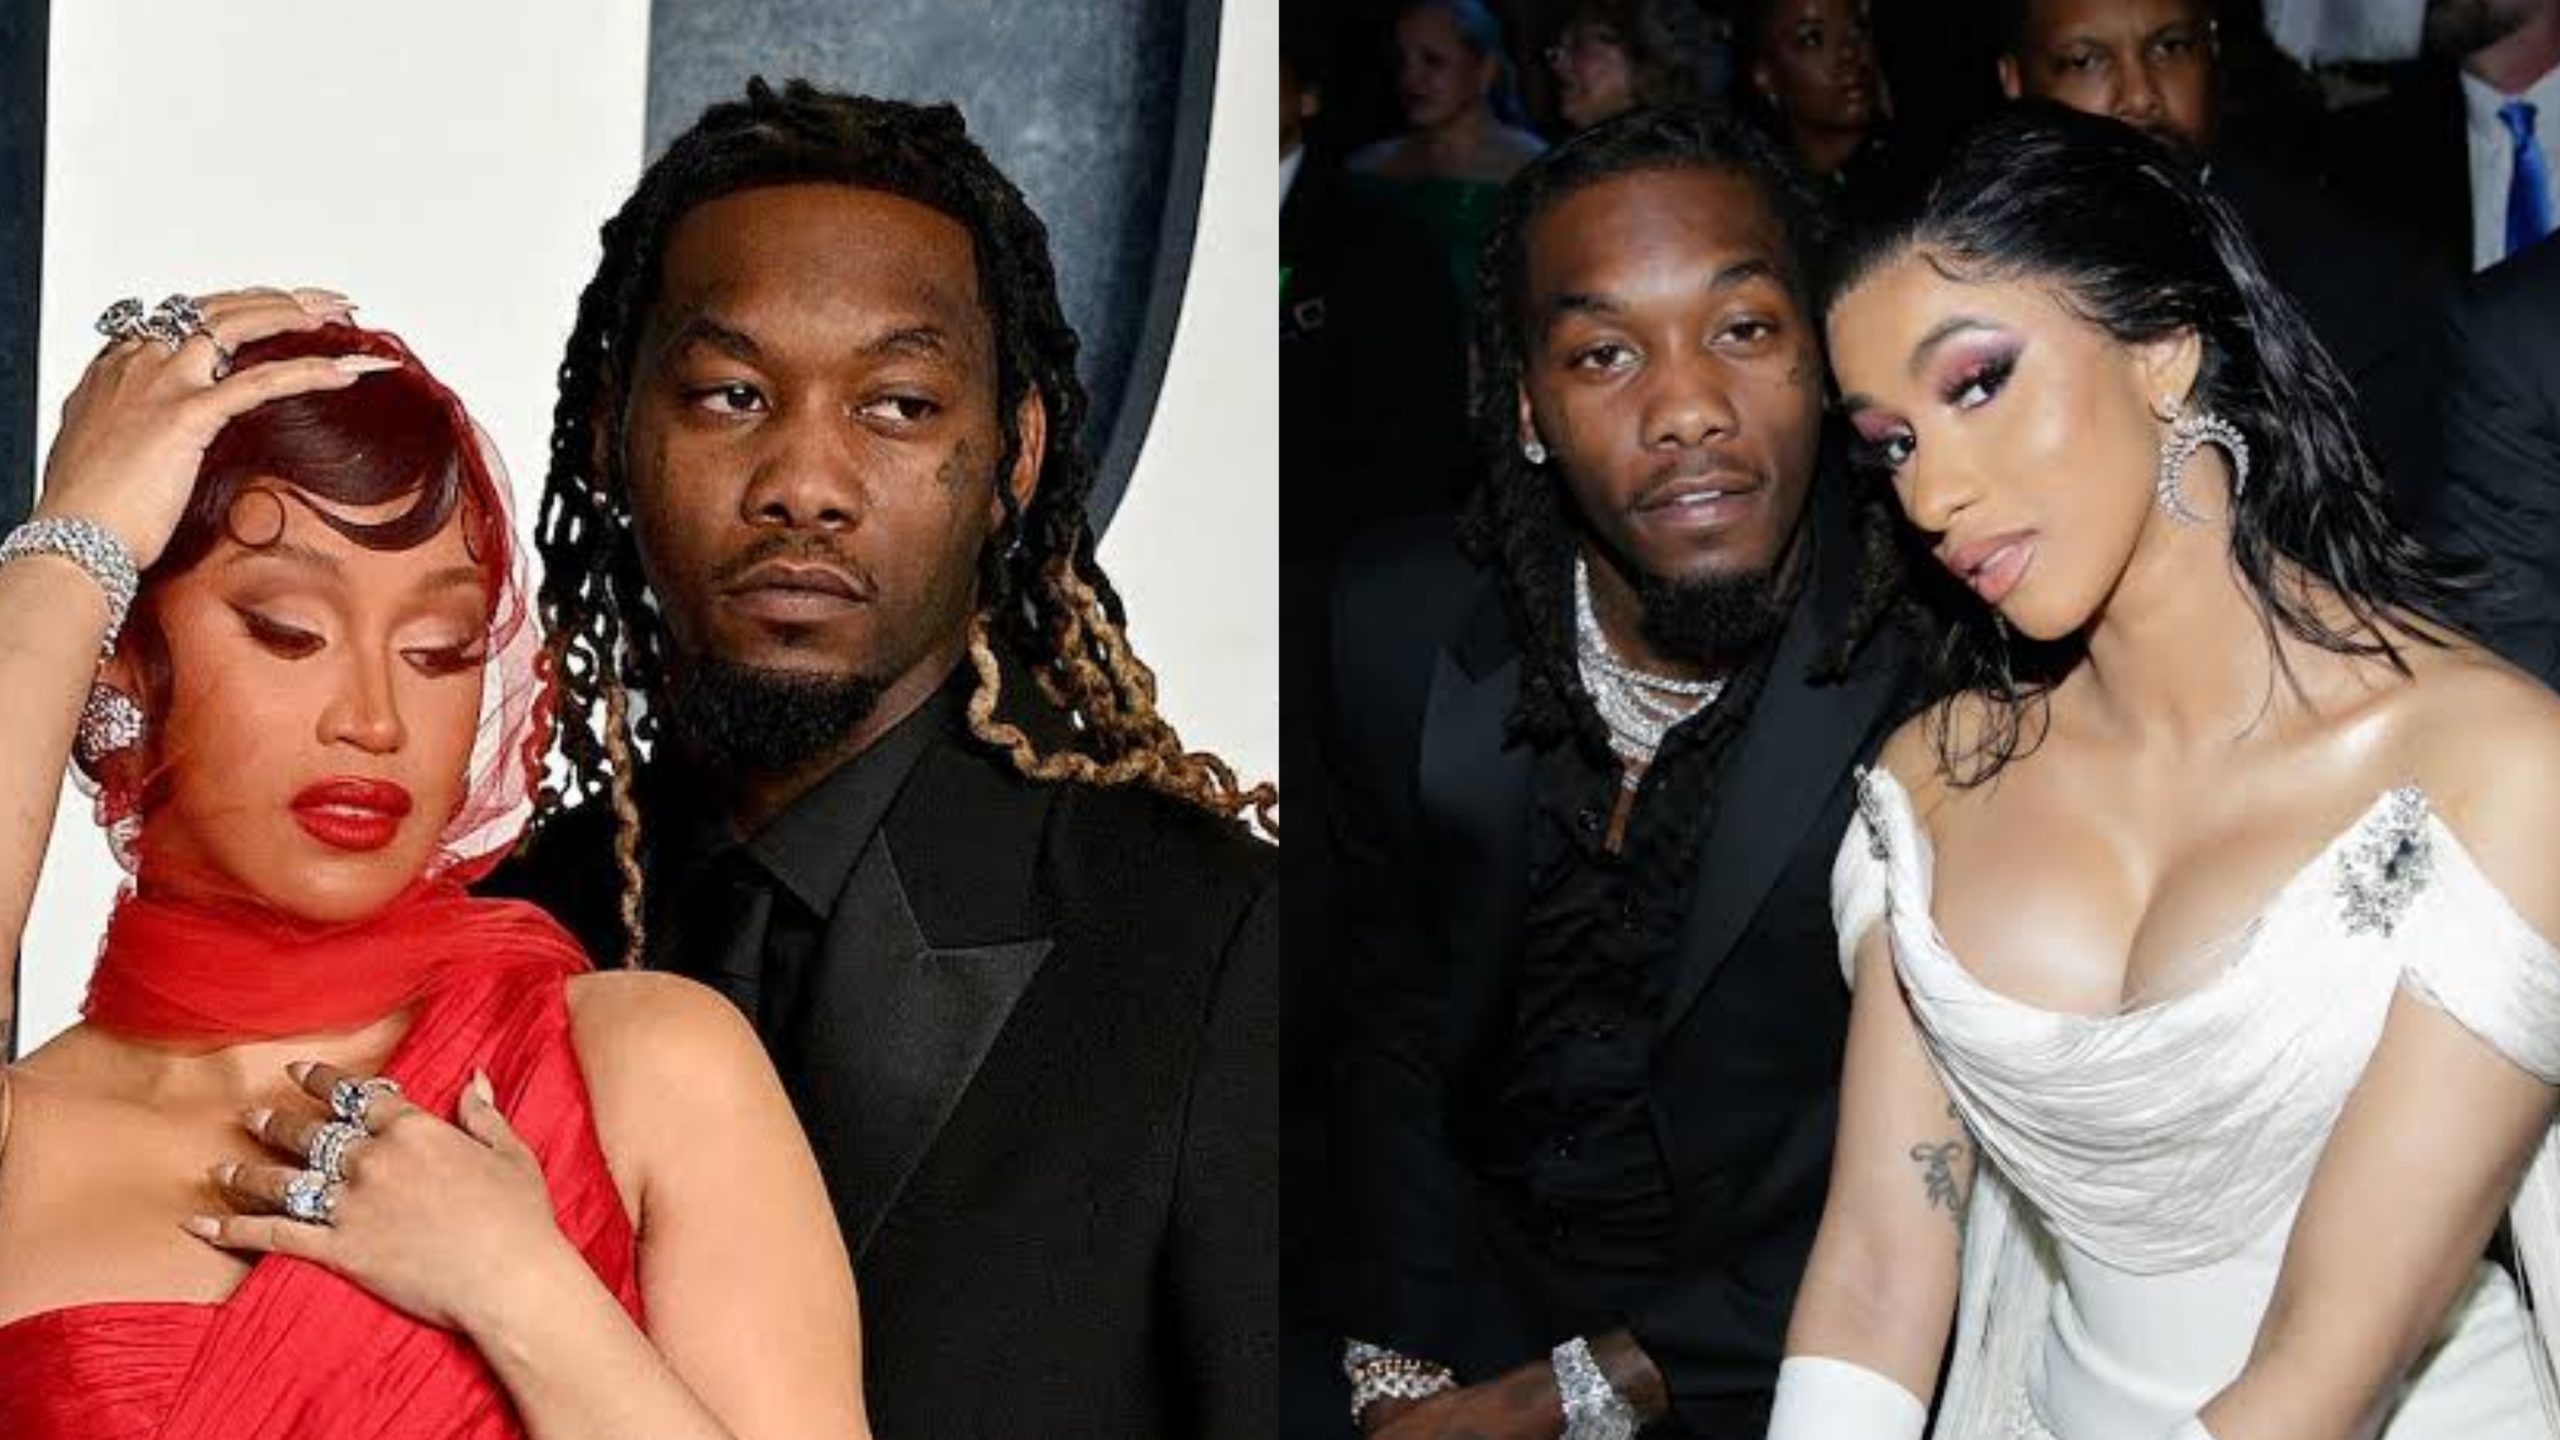 Offset Accuses Cardi B of Cheating, Sparking Social Media Drama